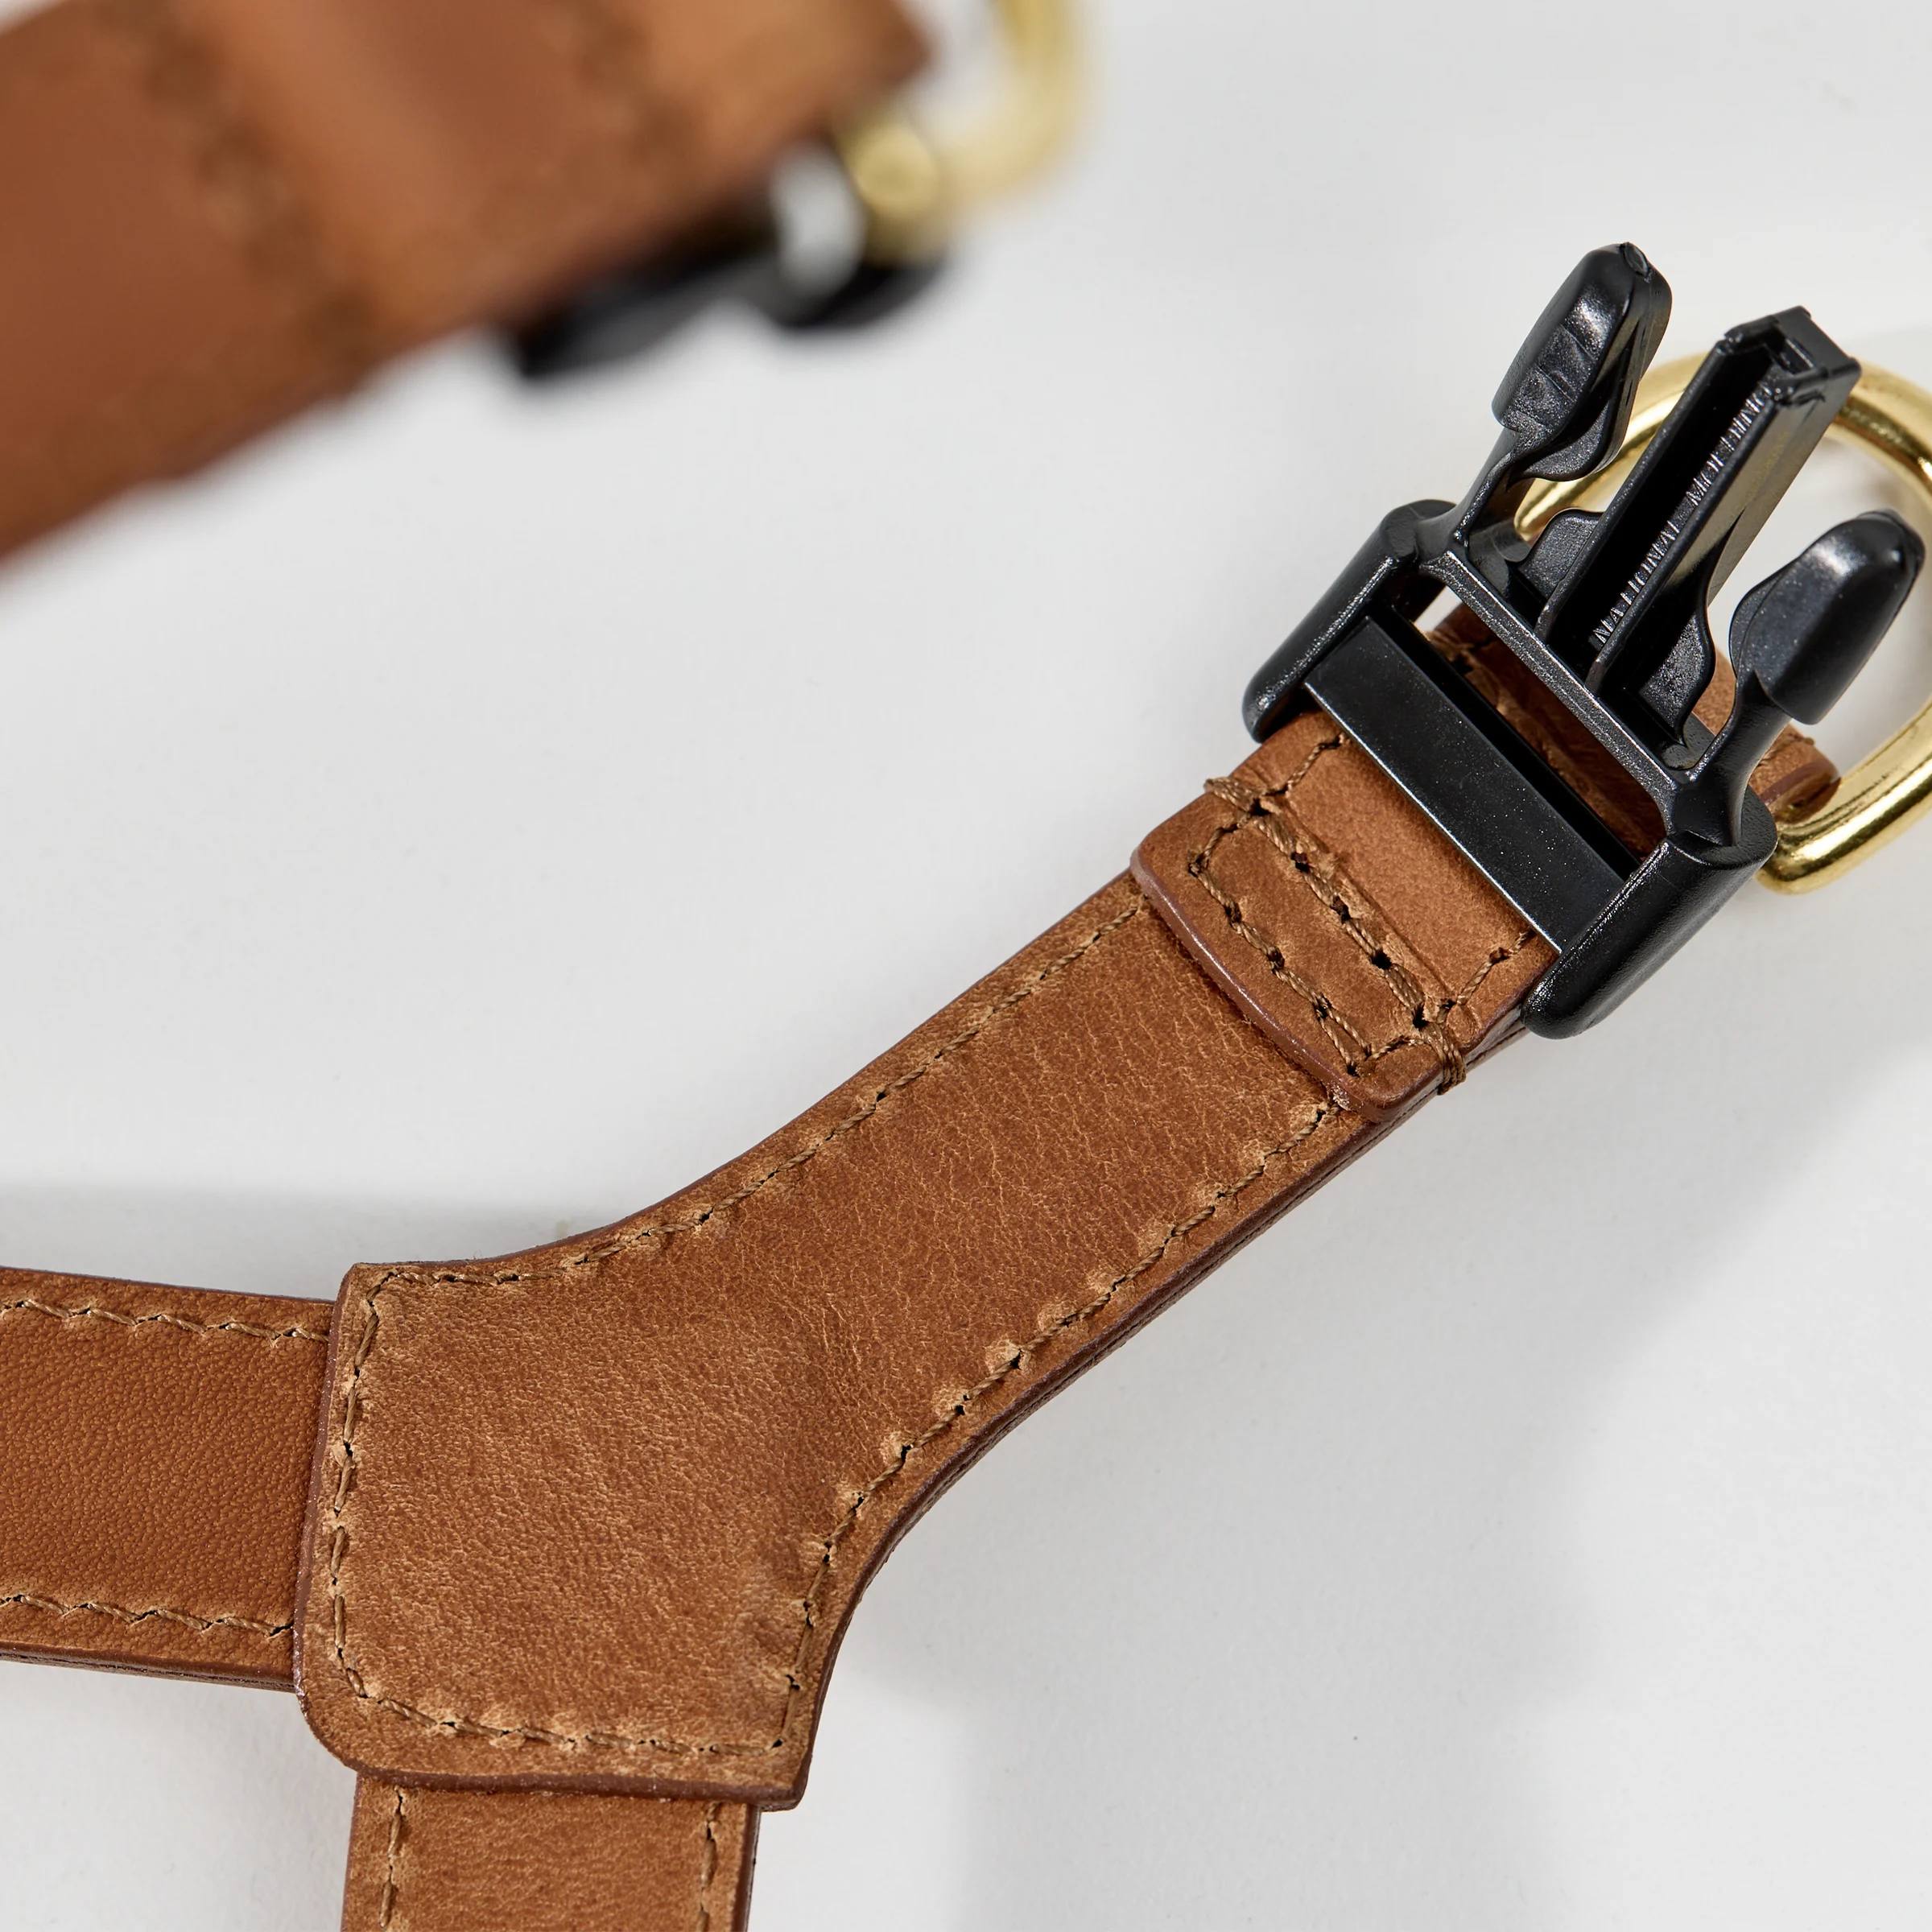 One-click Leather Dog Harness (Tan)